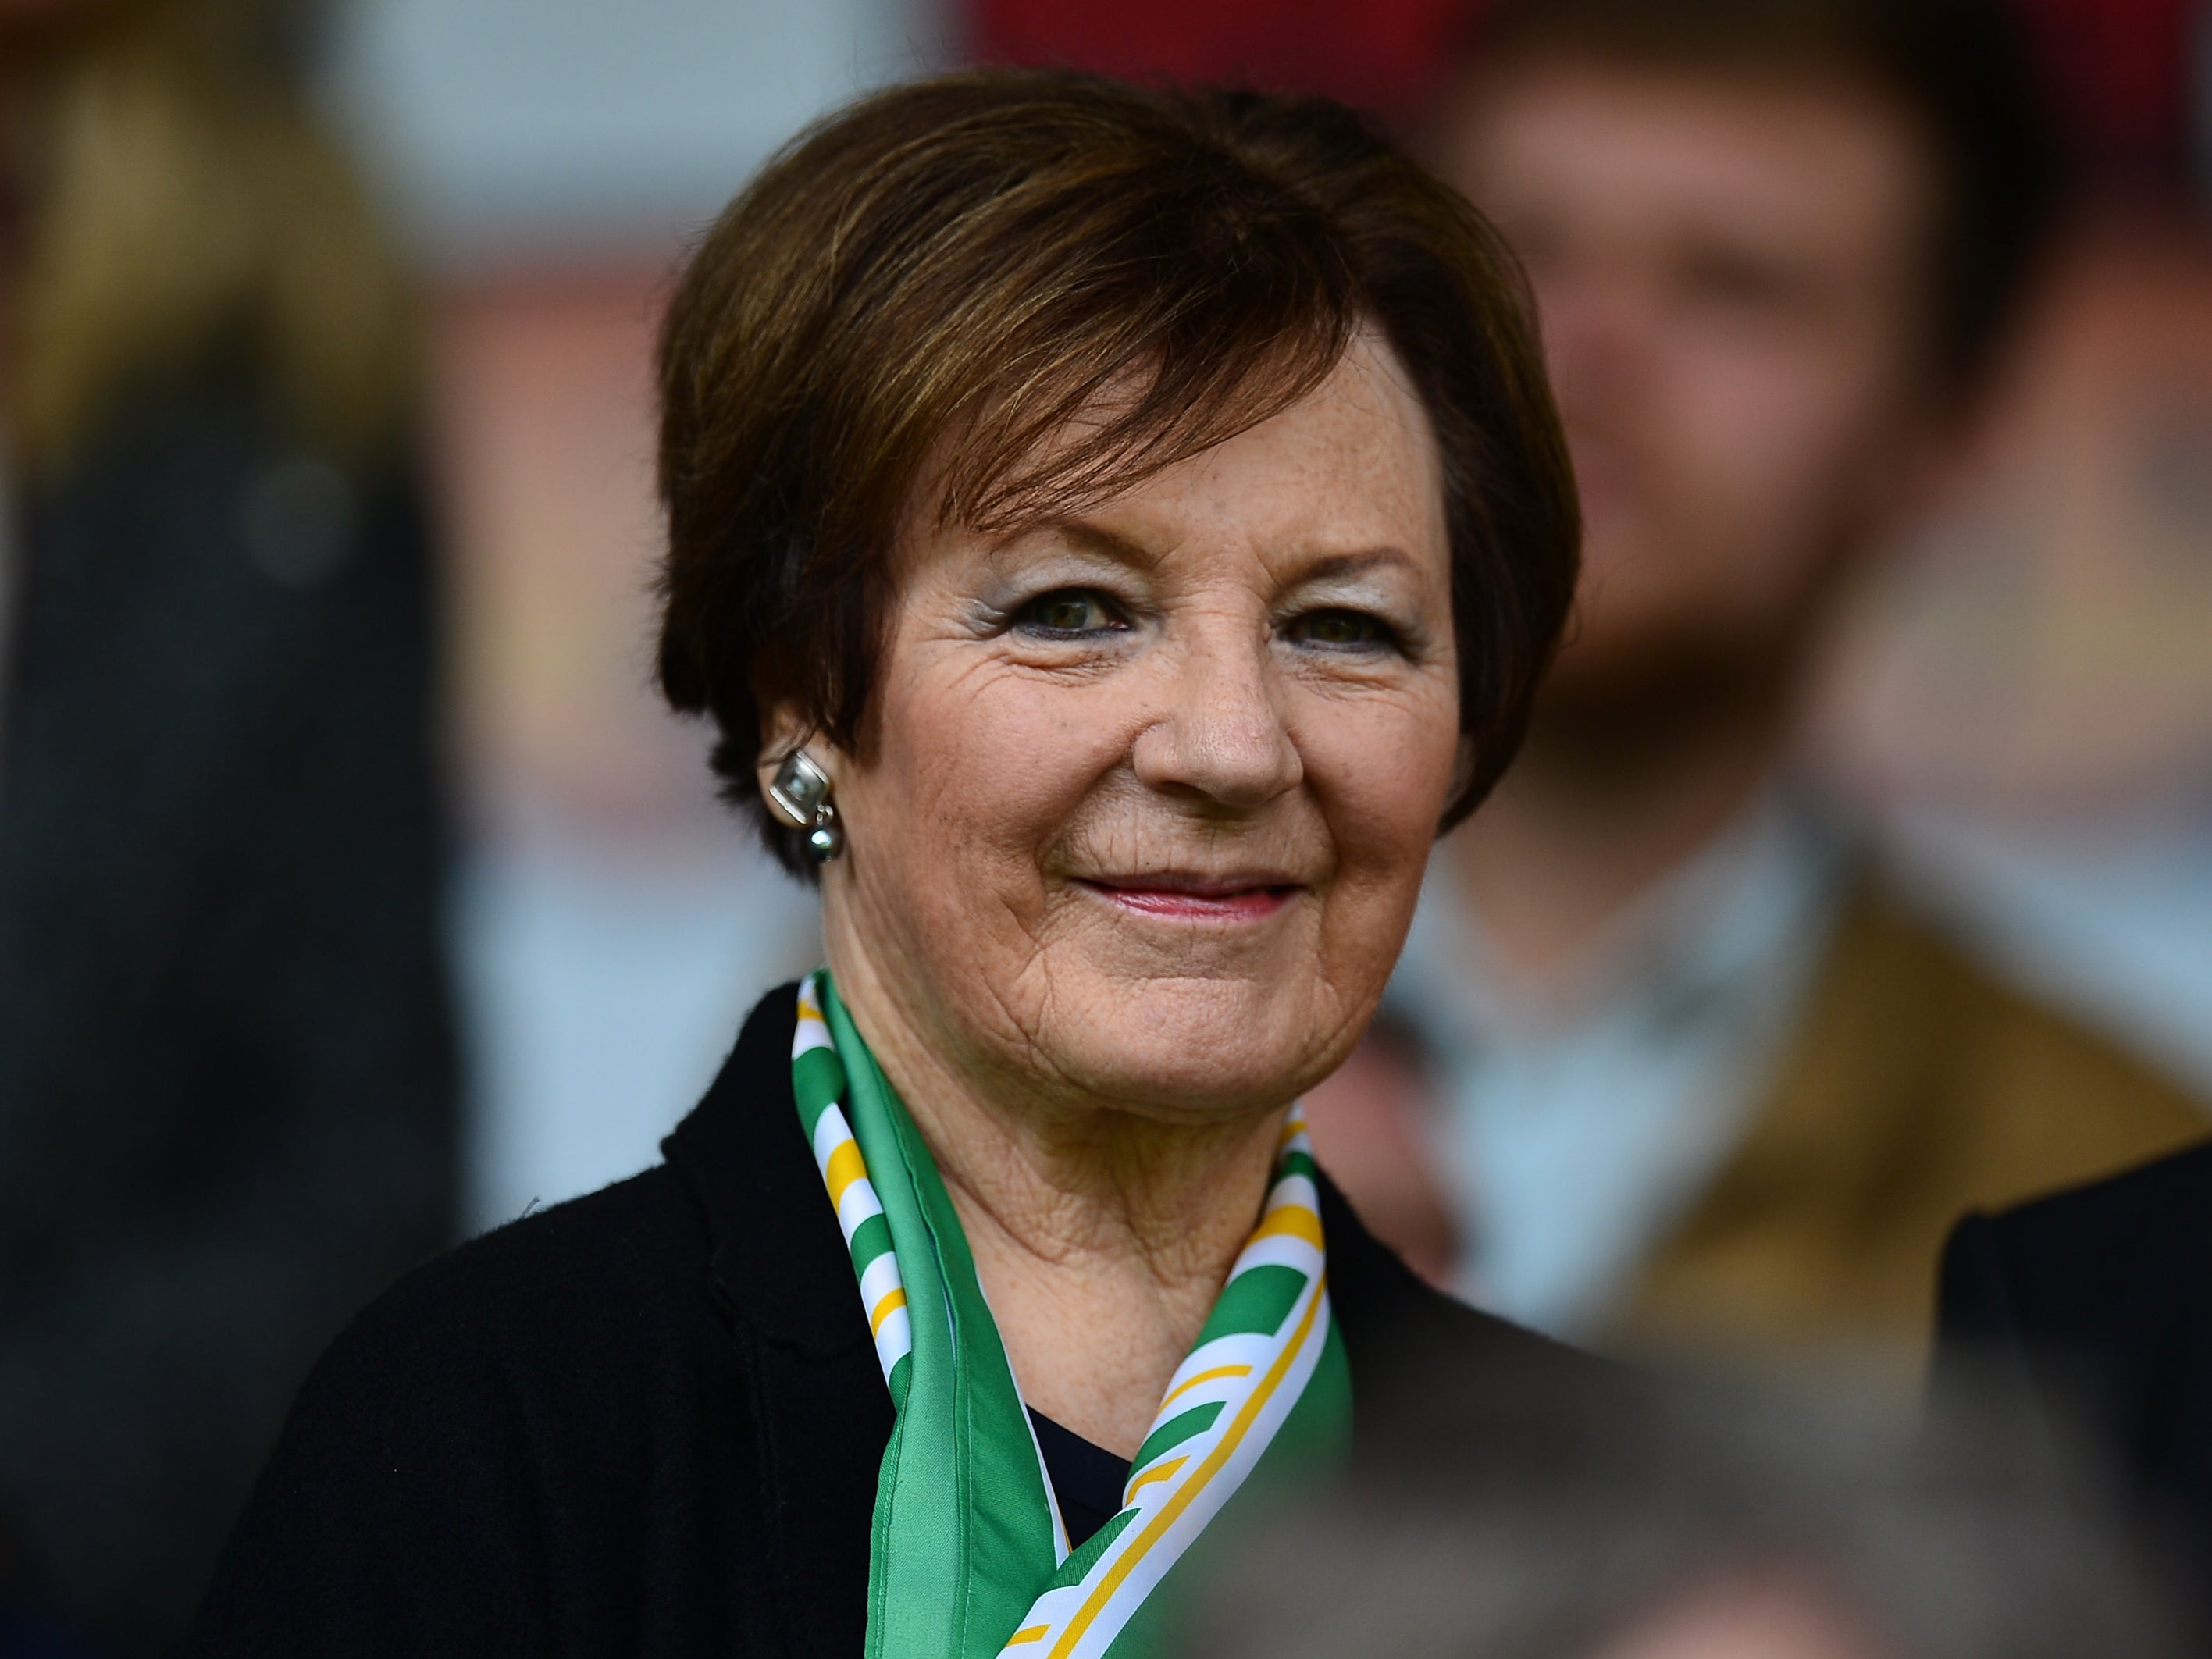 Delia Smith, Norwich City majority shareholder is seen on the stand prior to the Barclays Premier League match between Norwich City and Newcastle United at Carrow Road on April 2, 2016